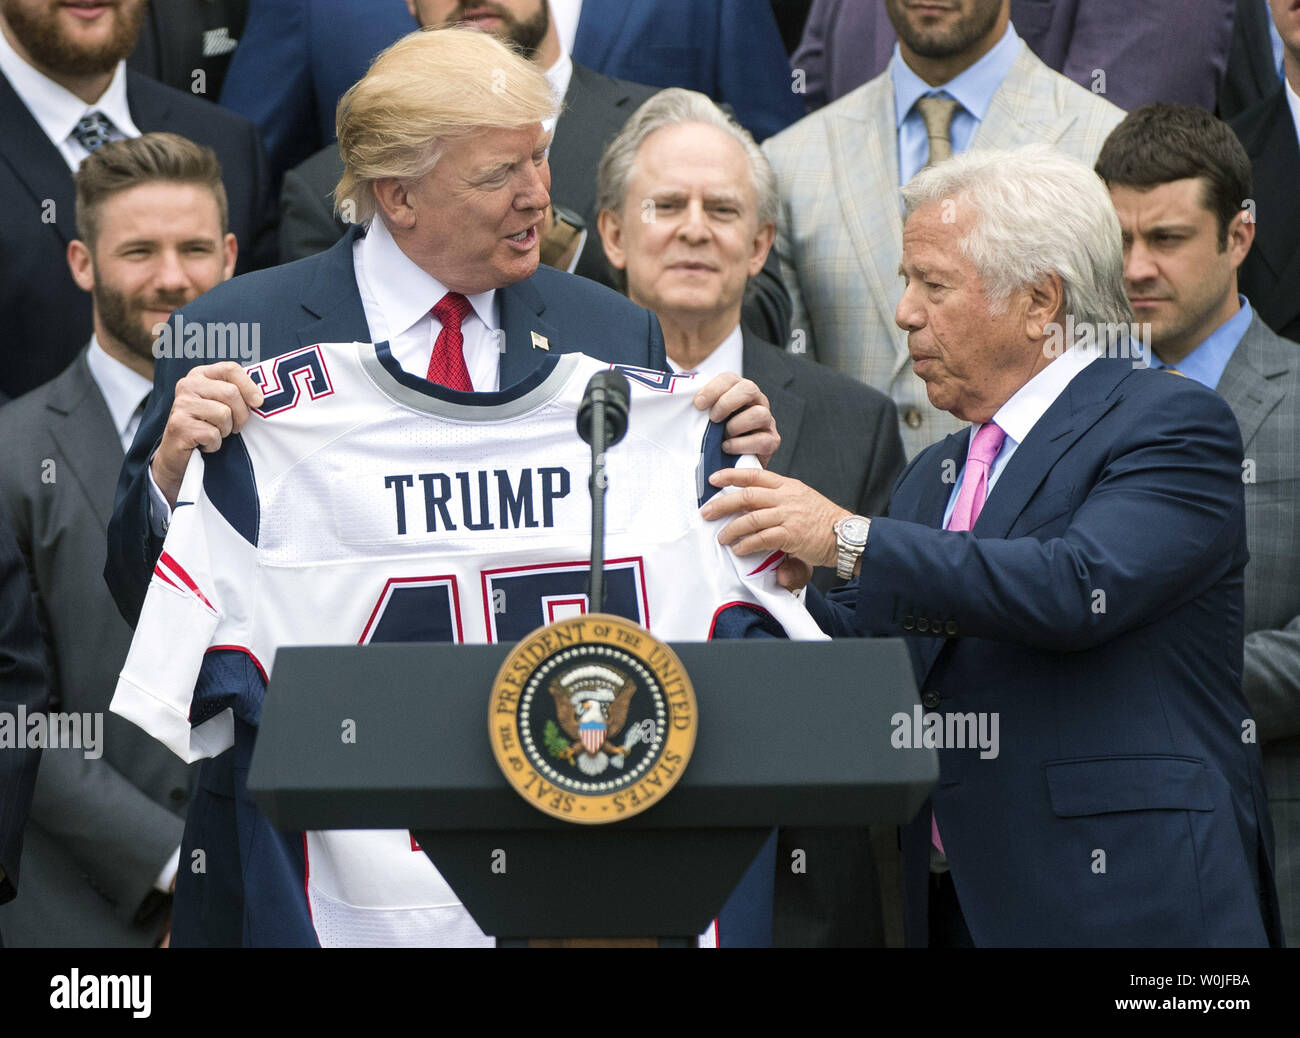 President Donald Trump is presented a custom jersey by New England Patriots  owner Robert Kraft during ceremony where Trump honored the Super Bowl LI  Champions New England Patriots at the White House